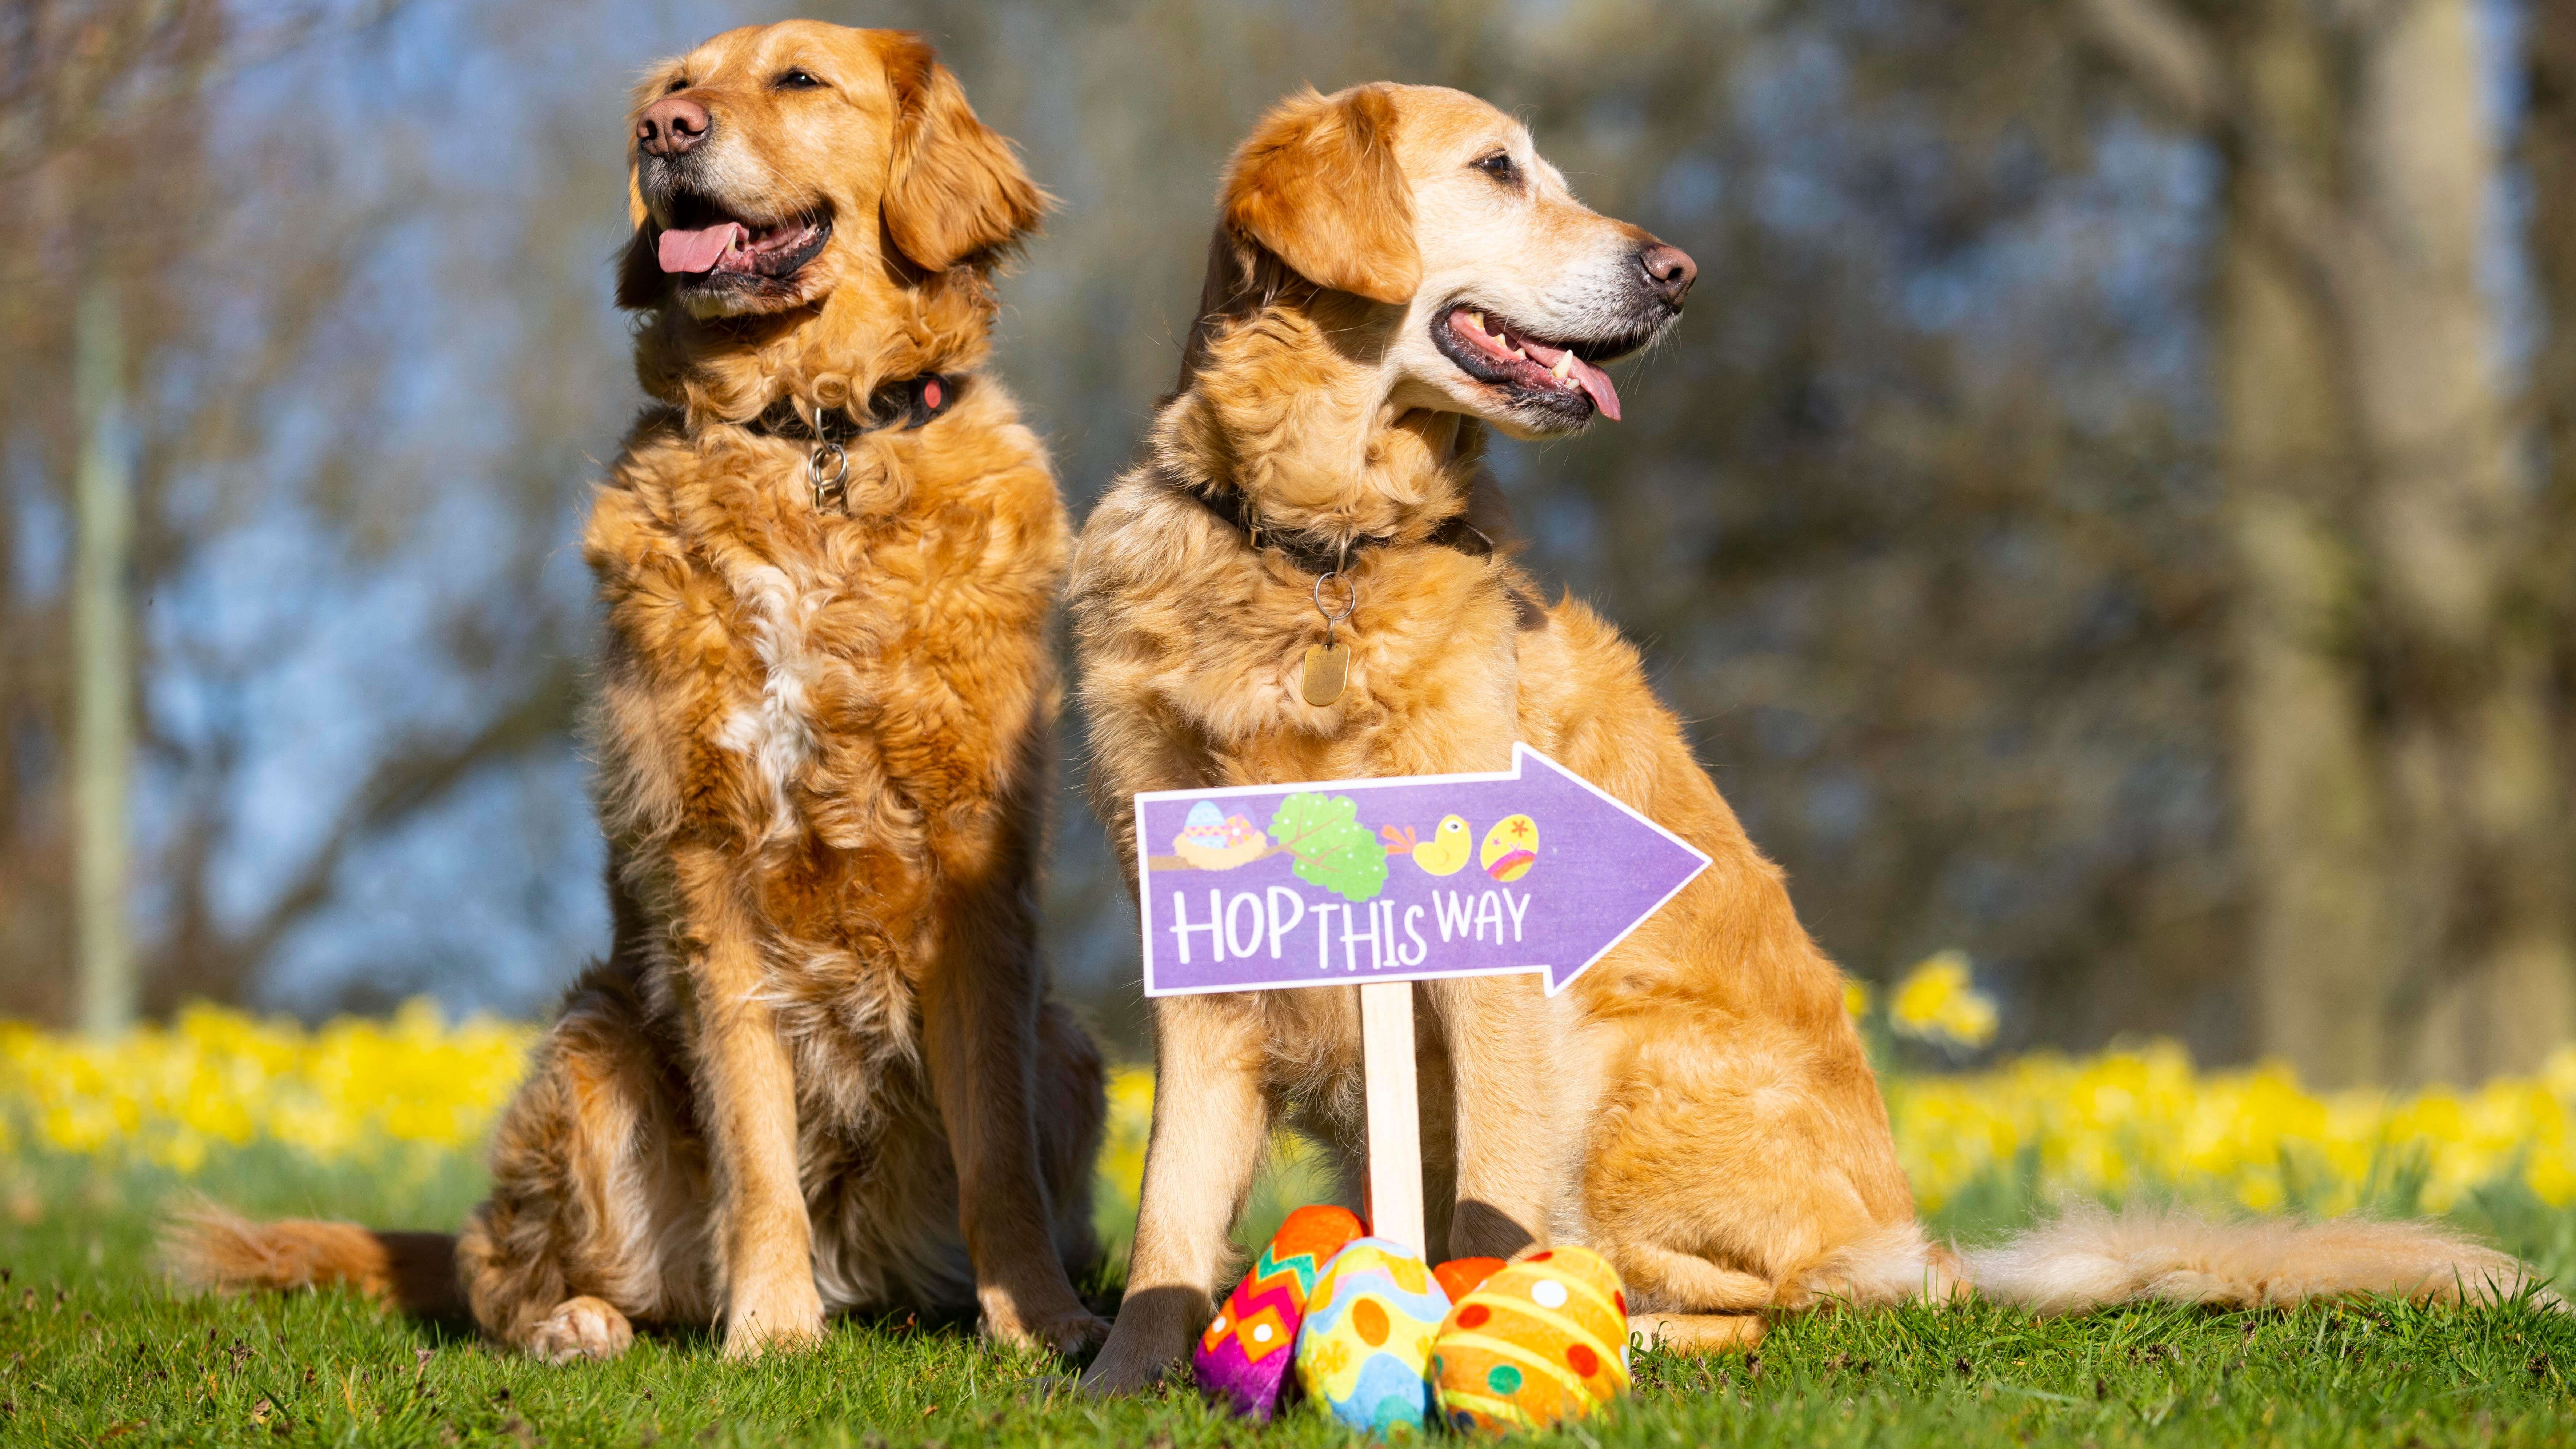 Golden retrievers Poppy and Riley sit smiling by an arrow Easter egg hunt sign which says 'Hop this way'. Daffodils are in the background.